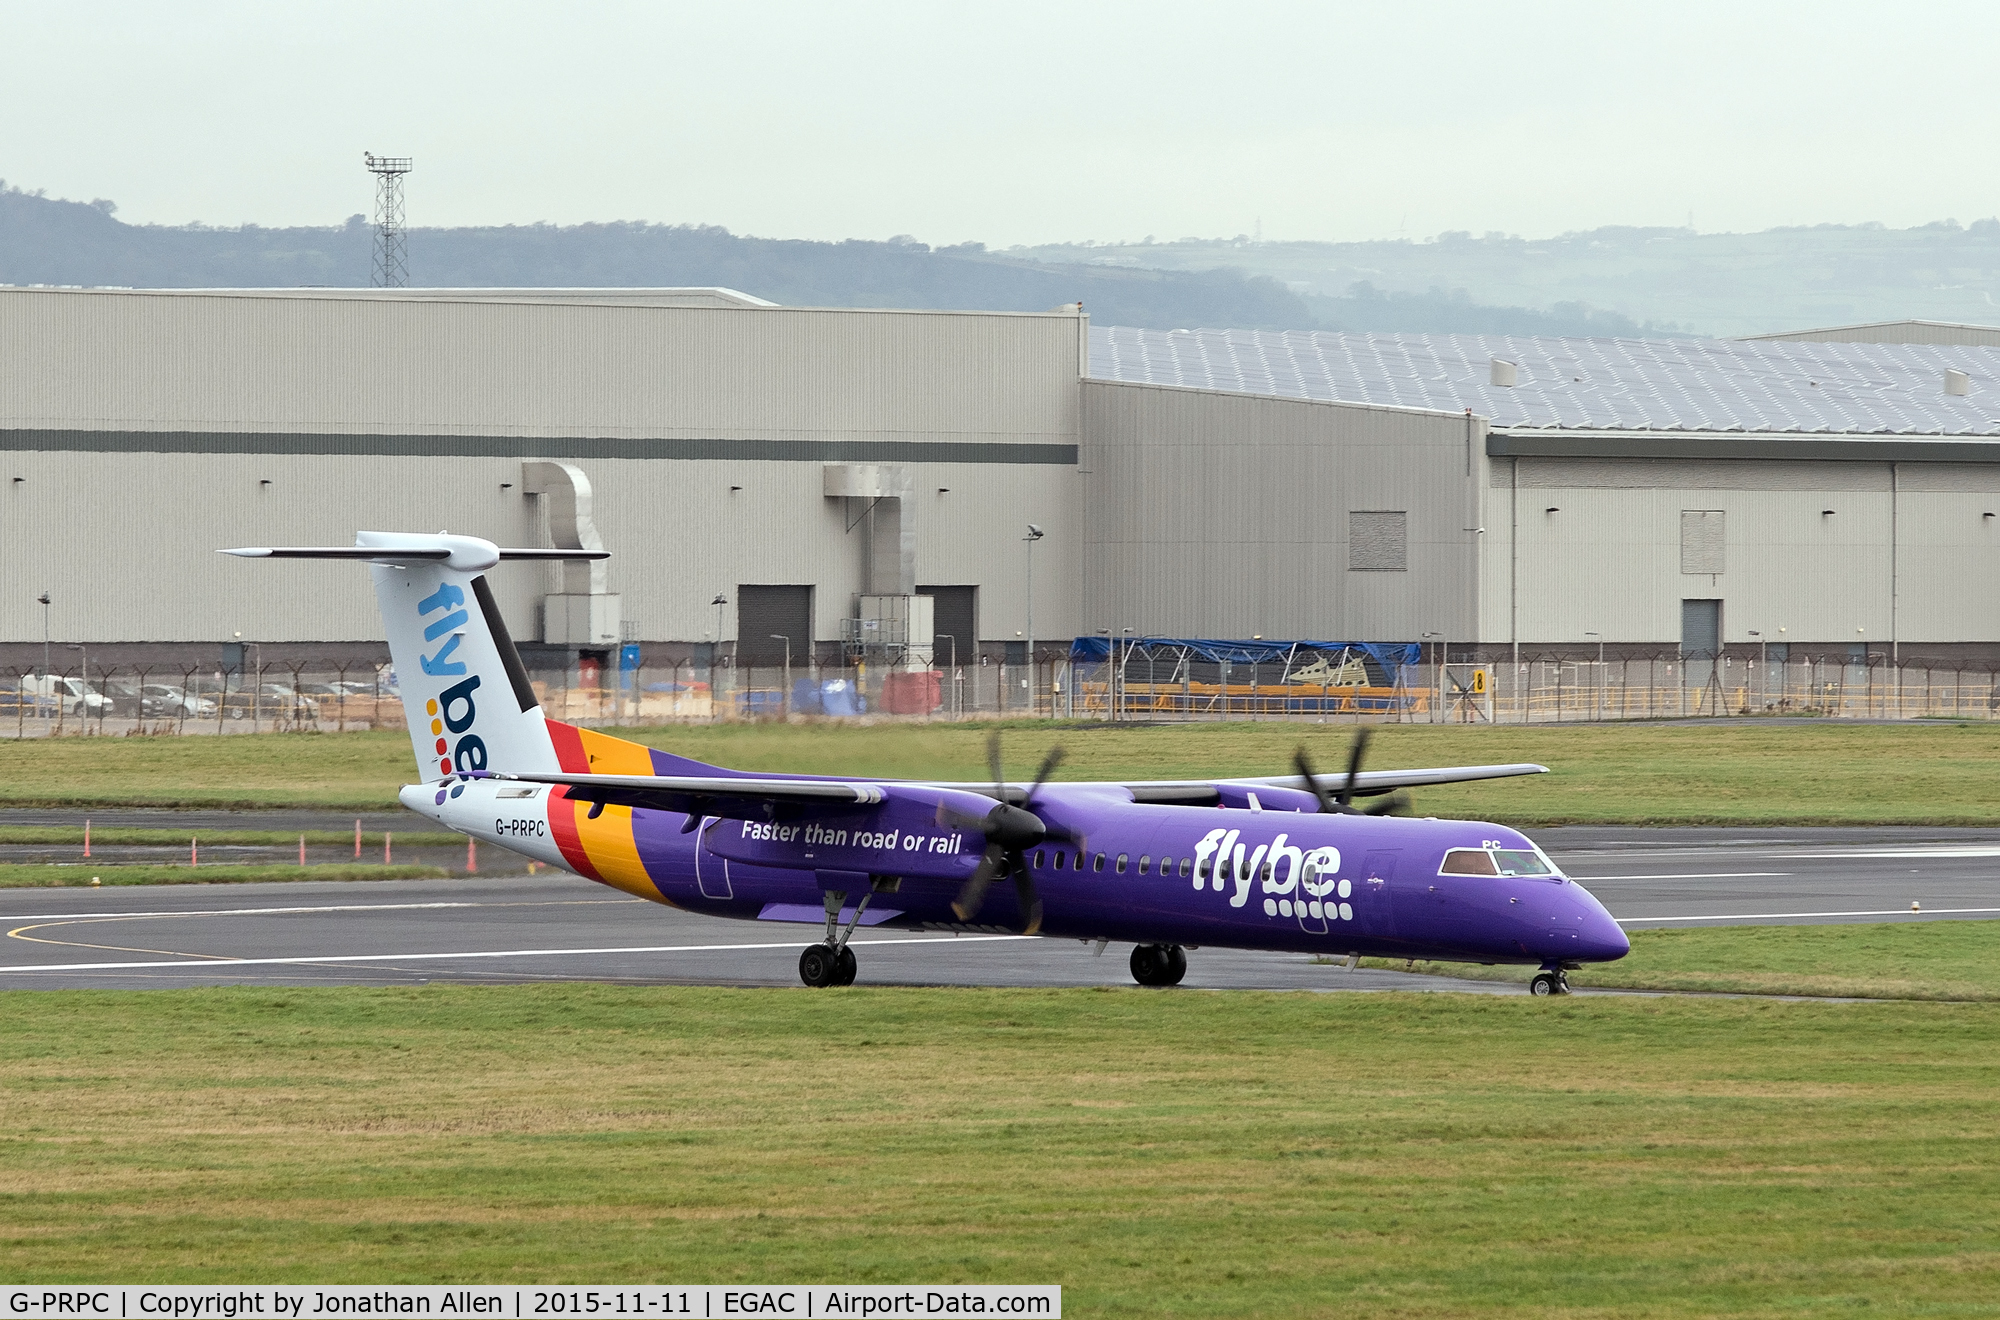 G-PRPC, 2010 Bombardier DHC-8-402 Dash 8 C/N 4338, Arriving at George Best Belfast City Airport.